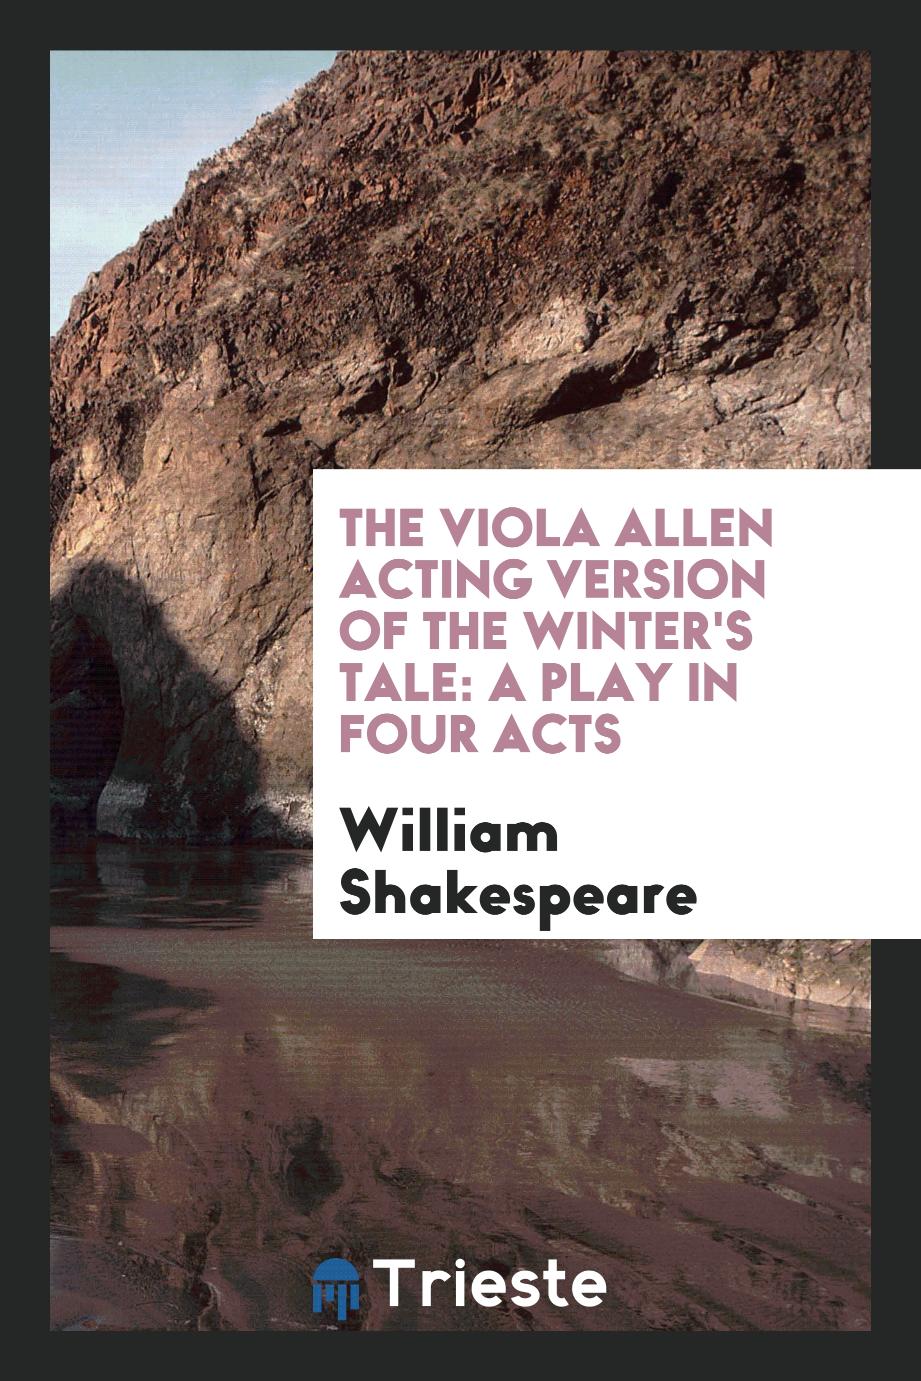 The Viola Allen Acting Version of The Winter's Tale: A Play in Four Acts